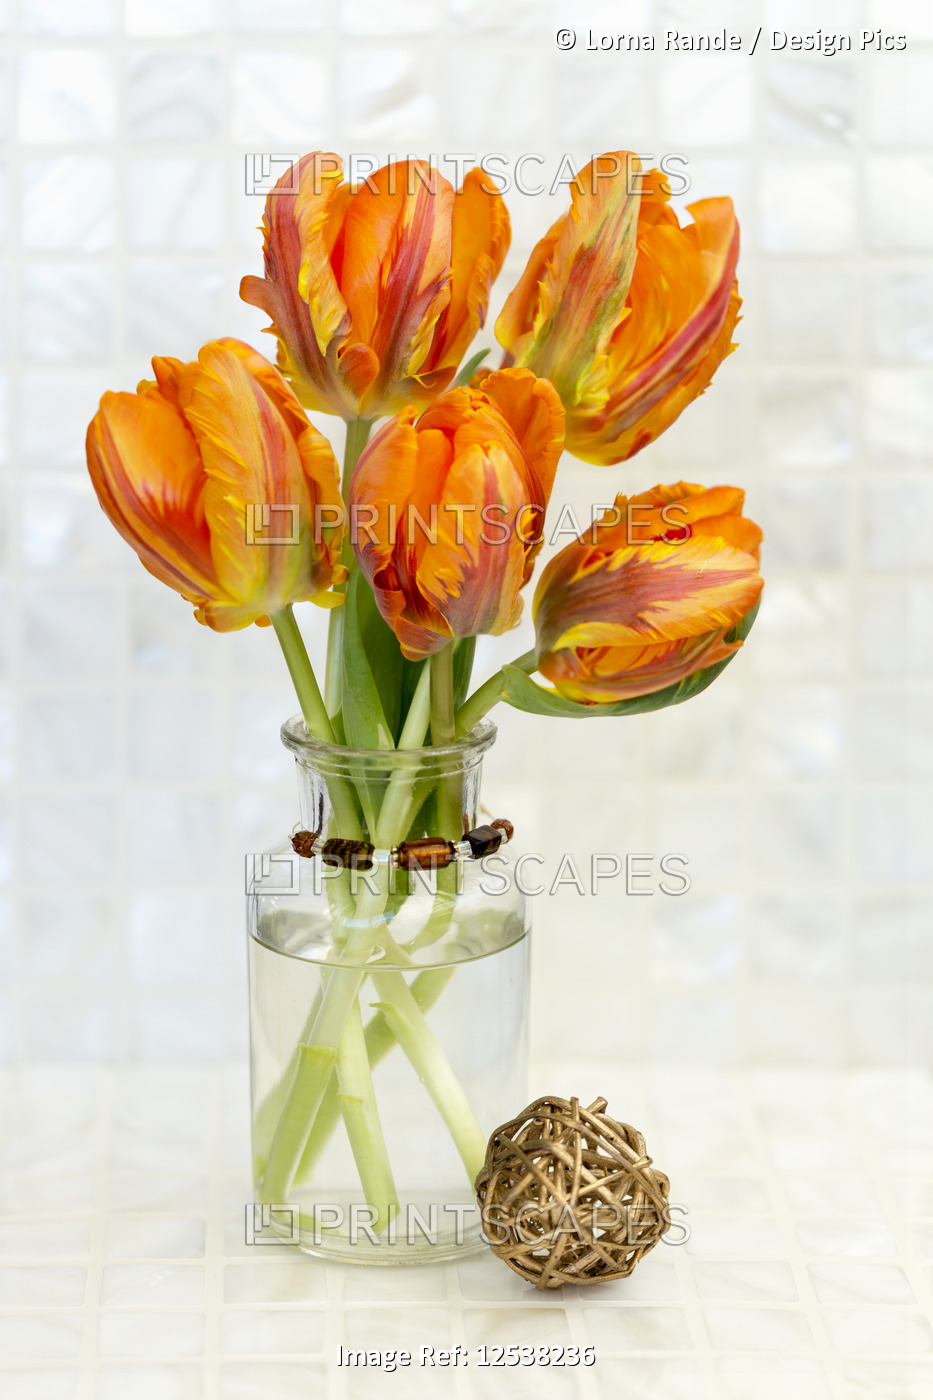 Orange tulips in a decorative vase against a white background